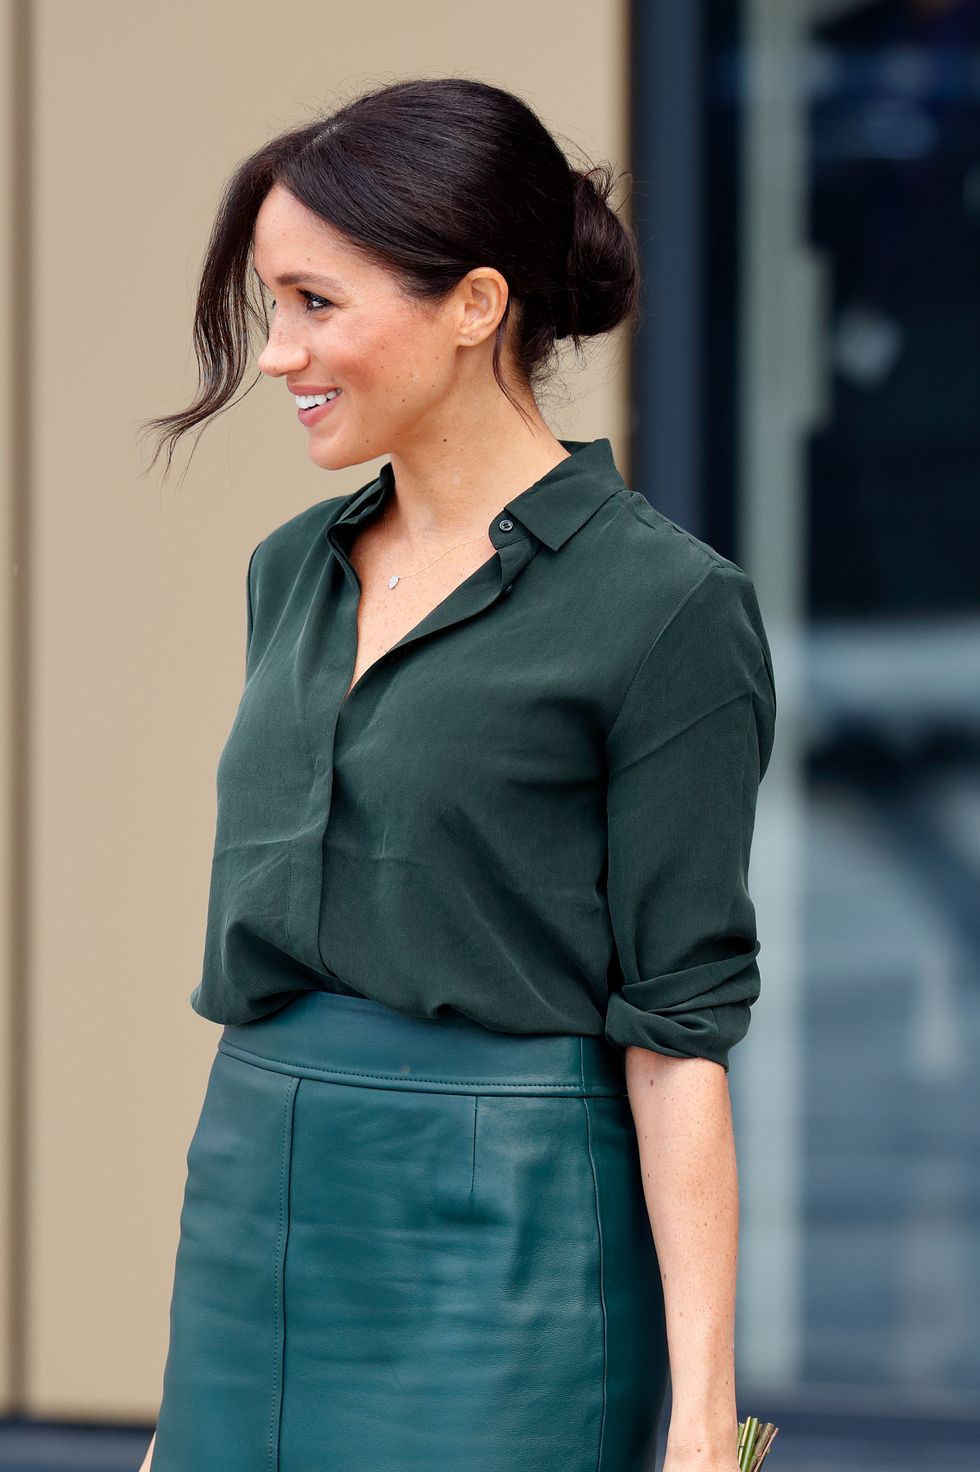 21 times Kate Middleton and Meghan Markle wore high street